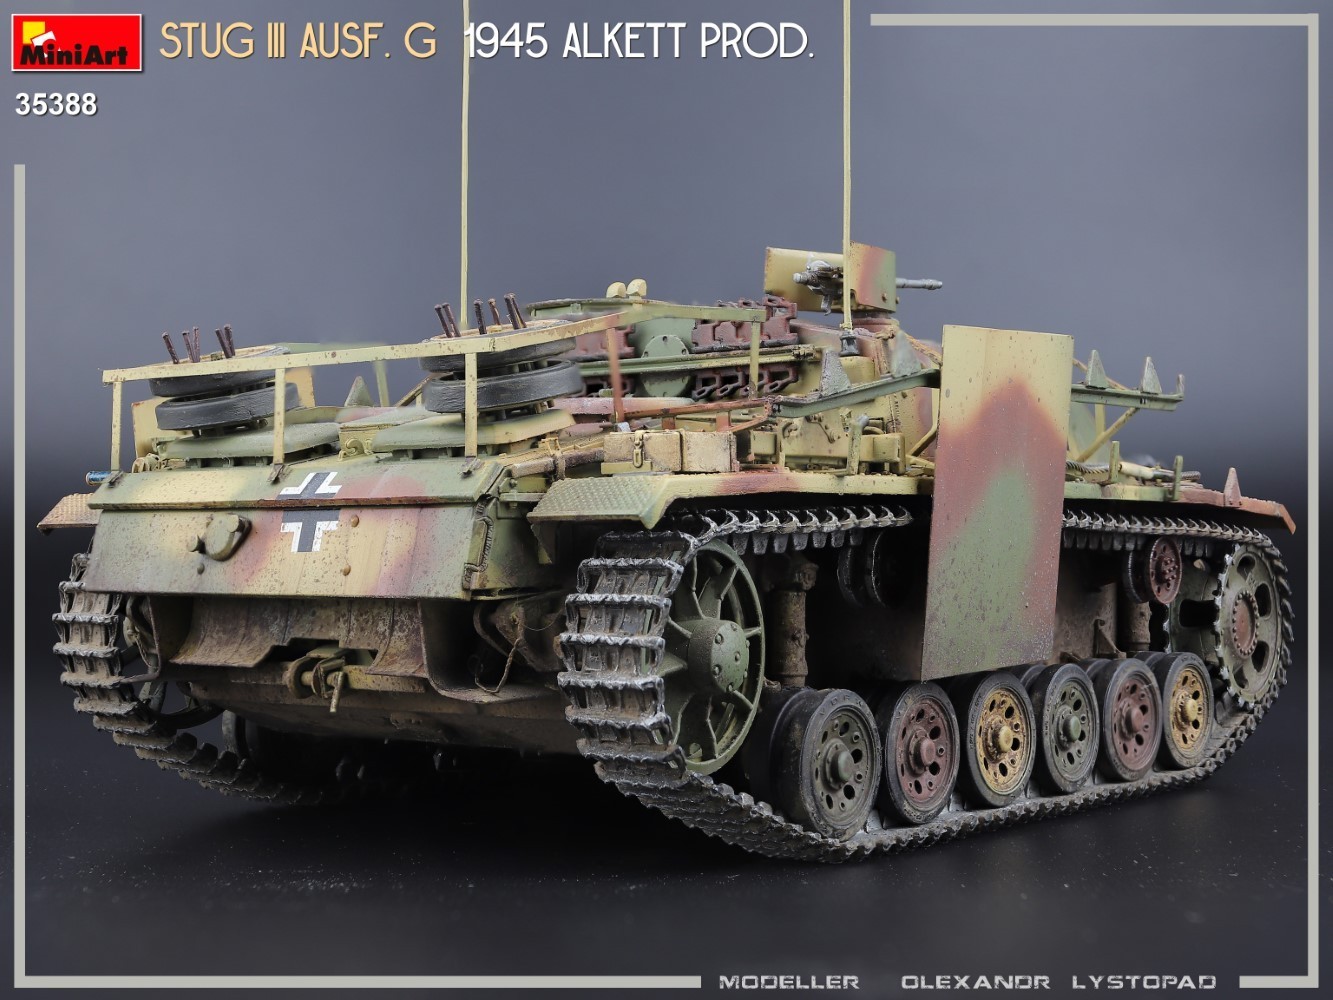 MiniArt to Release Highly Detailed 1/35 StuG III Ausf. G 1945 Alkett Prod. Model Kit Painting and Marking-12